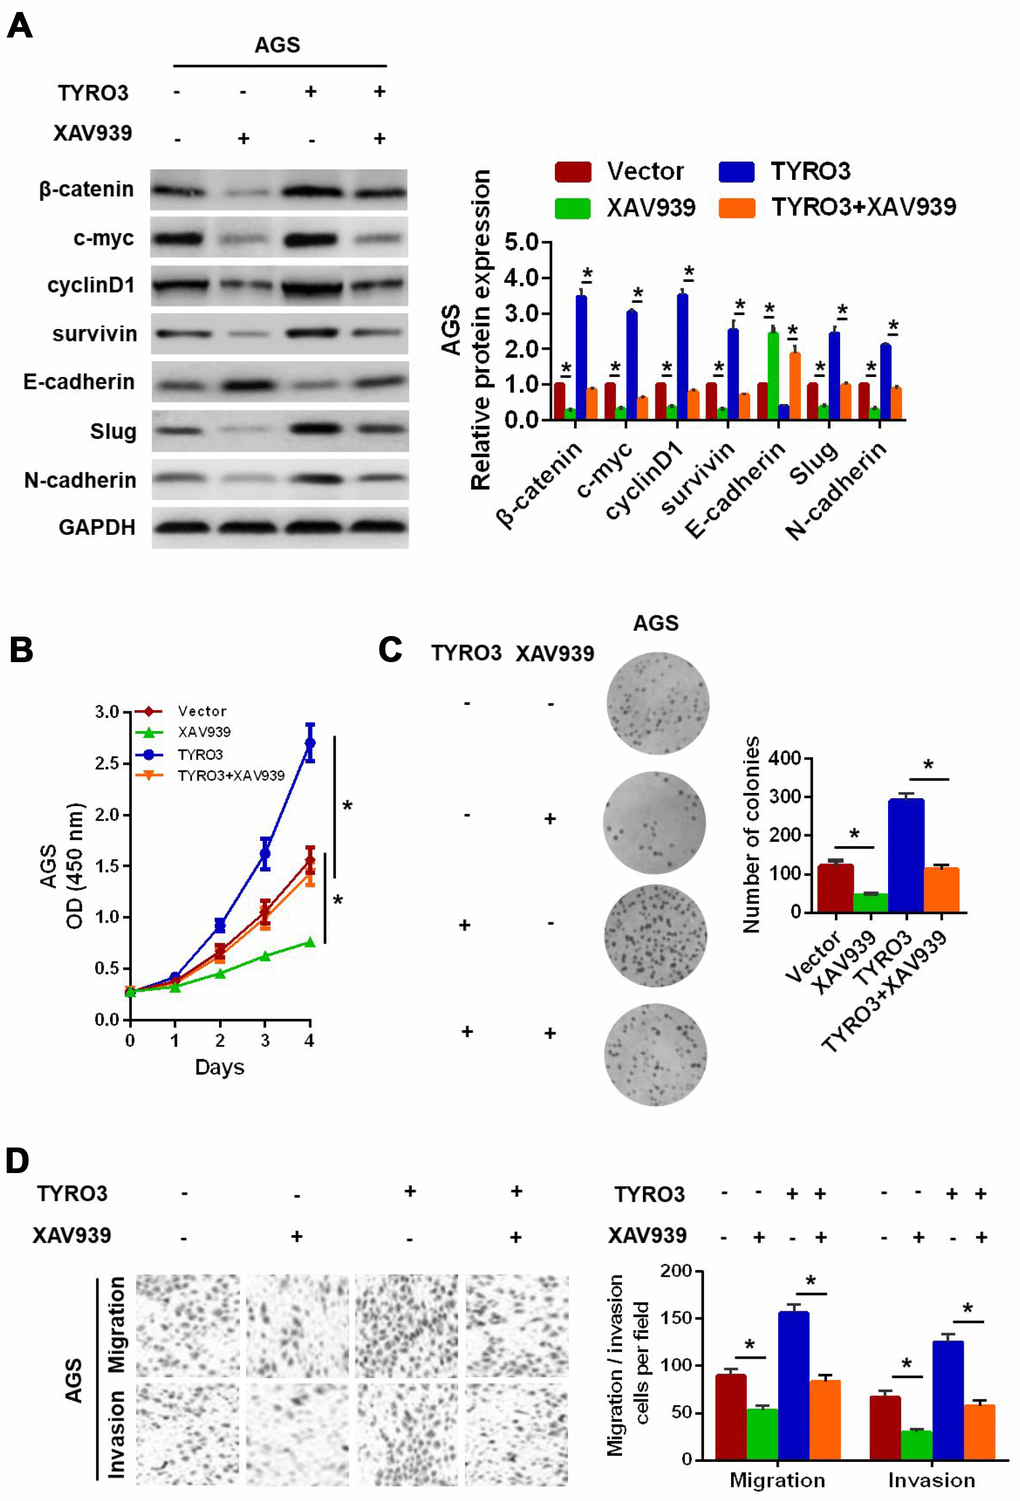 Wnt/β-catenin signaling involved in TYRO3-facilitated gastric cancer (GC) cell epithelial-mesenchymal transition growth, migration, and invasion. (A) Western blot analysis of the indicated expression levels (β-catenin, c-myc, cyclinD1, survivin, E-cadherin, Slug, and N-cadherin) in modified GC cells treated with the Wnt/β-catenin signaling inhibitor, XAV939 (15 μM). Determination of the proliferative capability of modified GC cells with XAV939 (15 μM) treatment using the CCK-8 assay (B) and colony formation assay (C). (D) Determination of the migratory and invasive capabilities of modified GC cells with XAV939 (15 μM) treatment, using the Transwell assay. Glyceraldehyde 3-phosphate dehydrogenase was used as a loading control. *P 